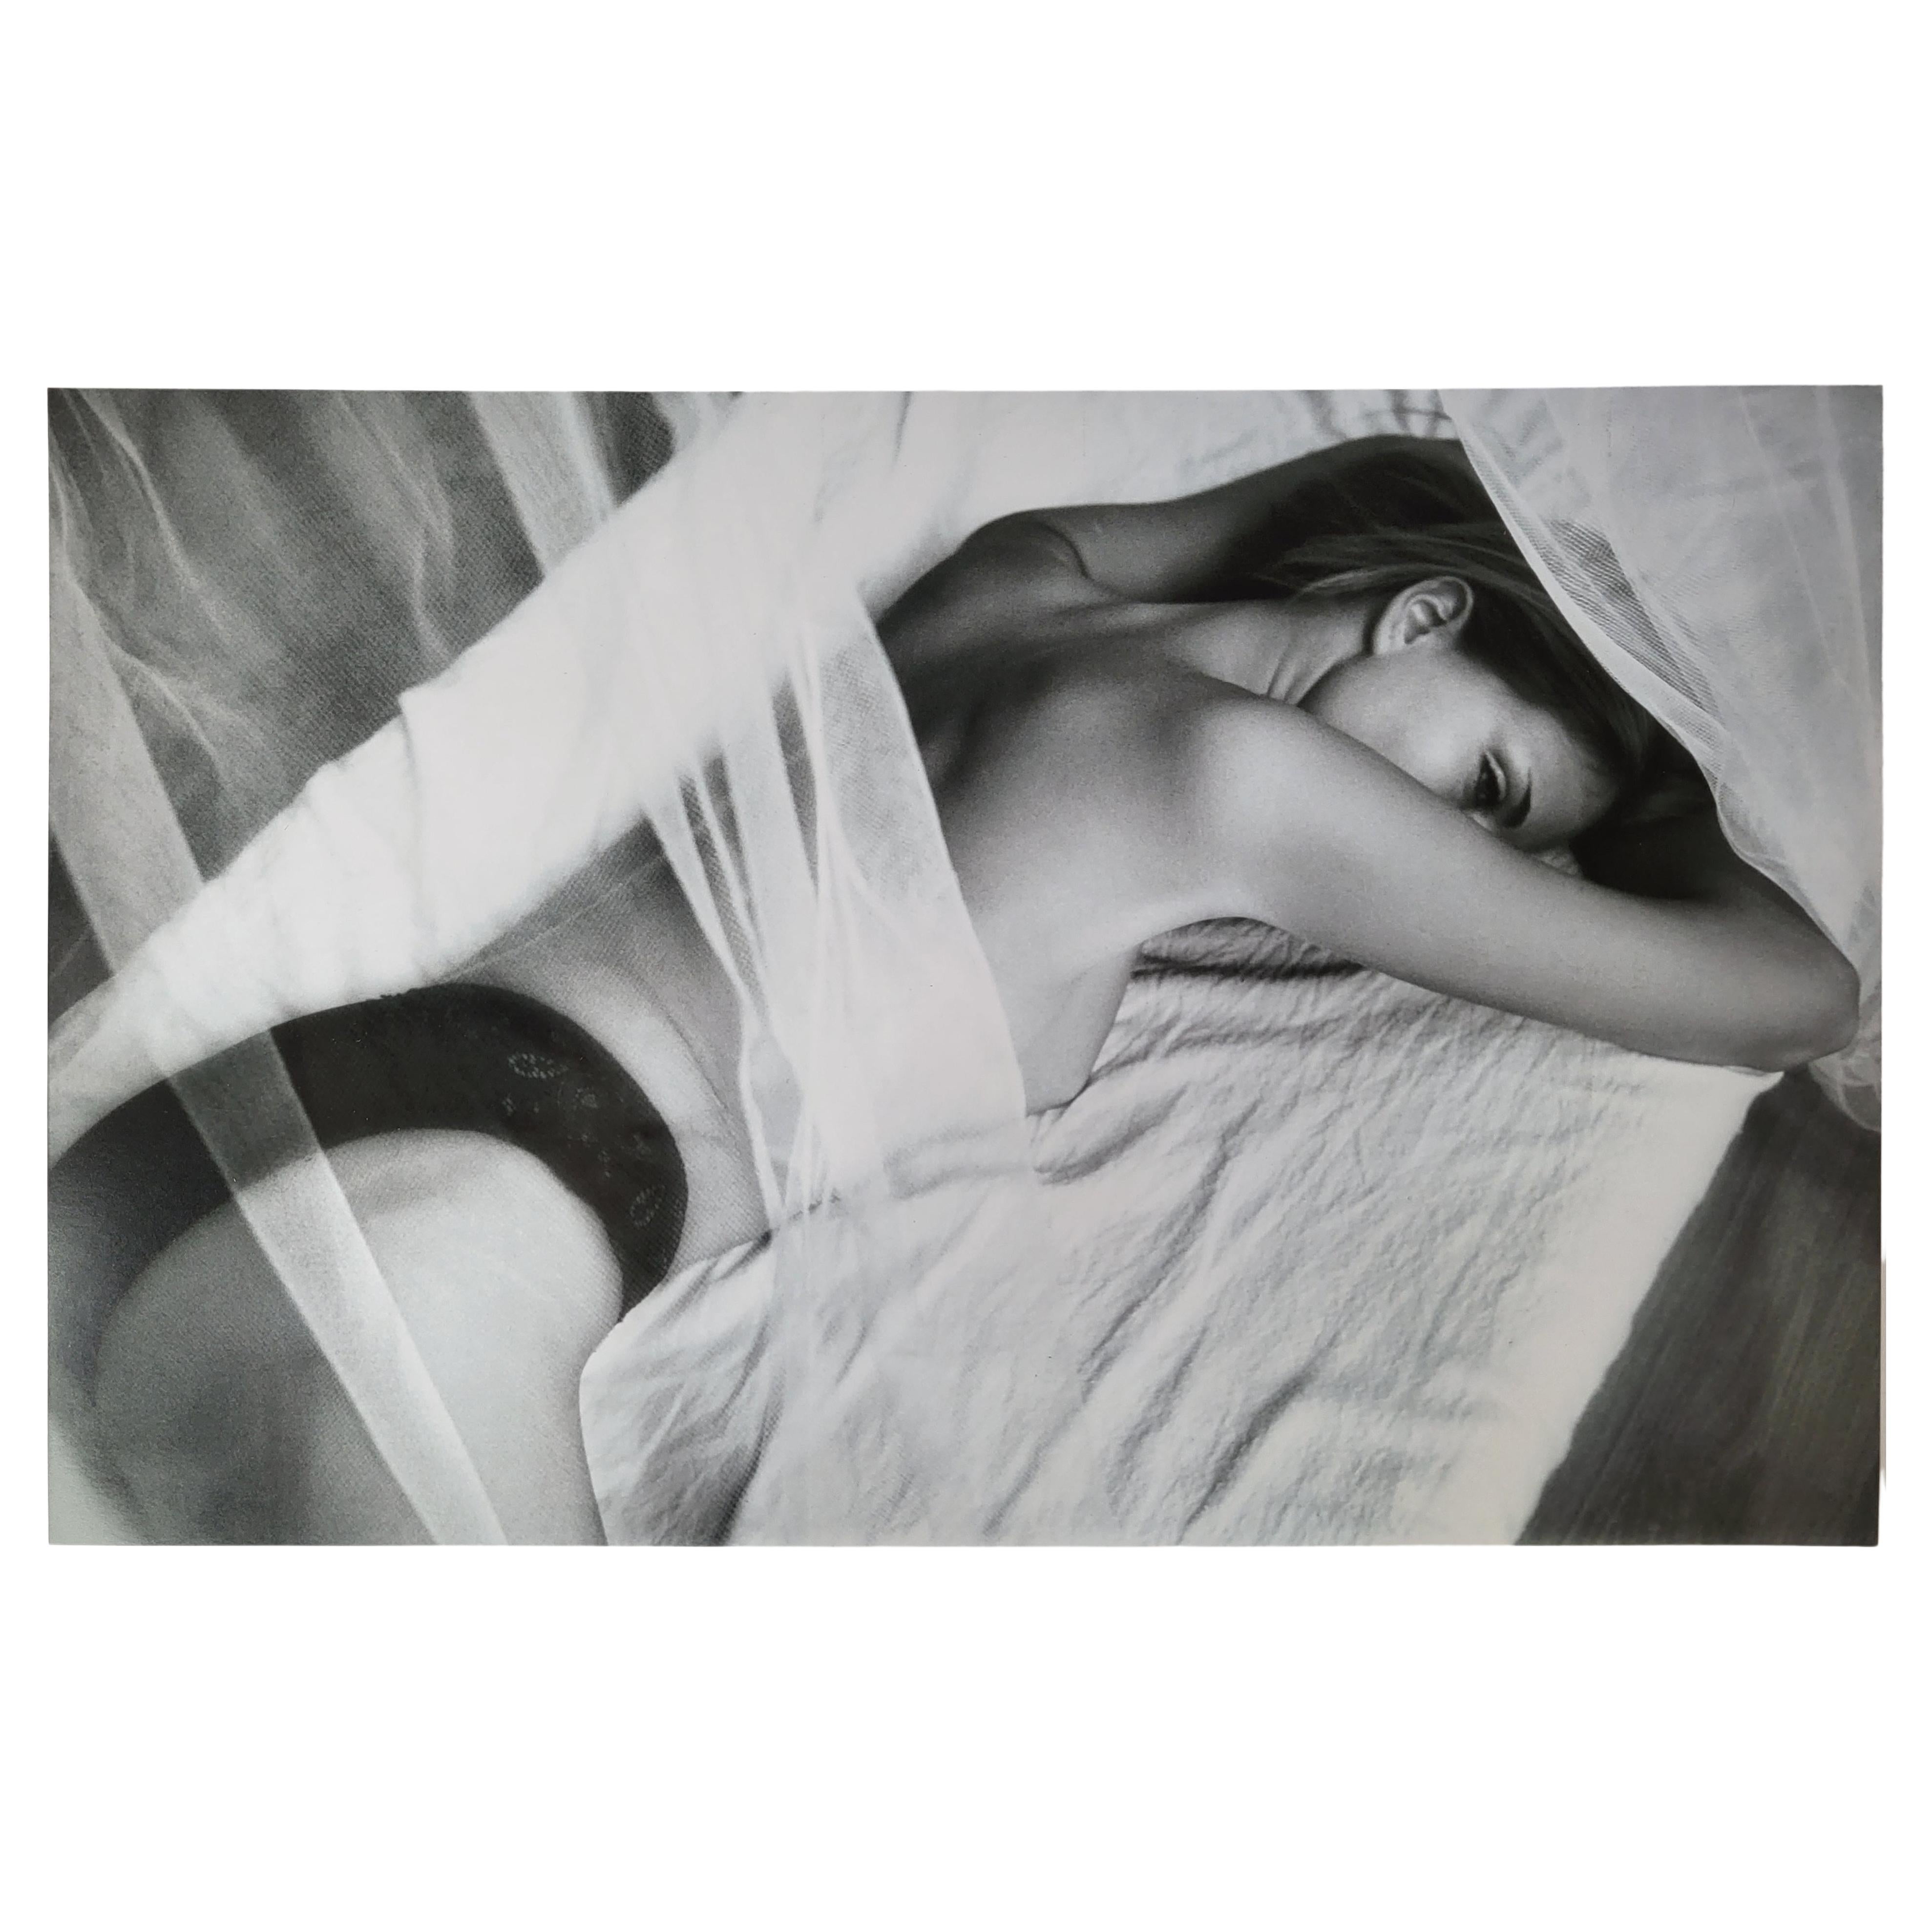 Photograph by Alain Daussin Black and white print 1998 